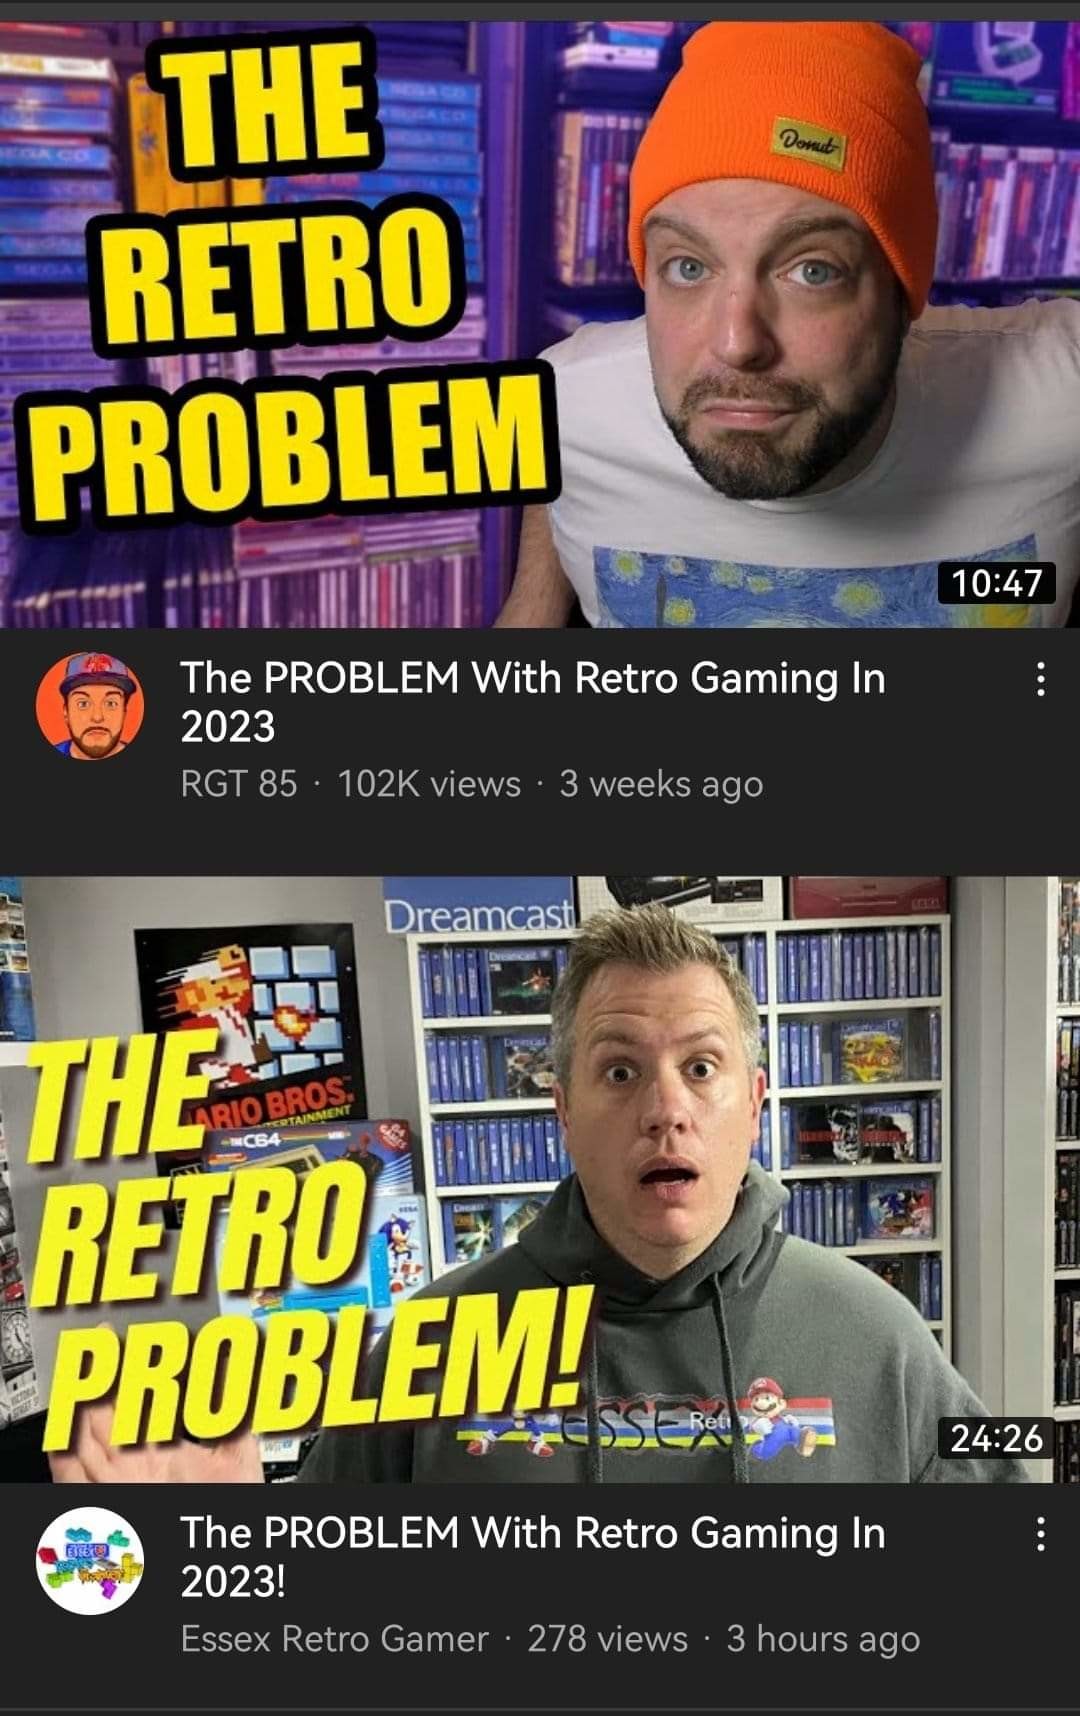 The retro problem. .. There’s a problem? really? 